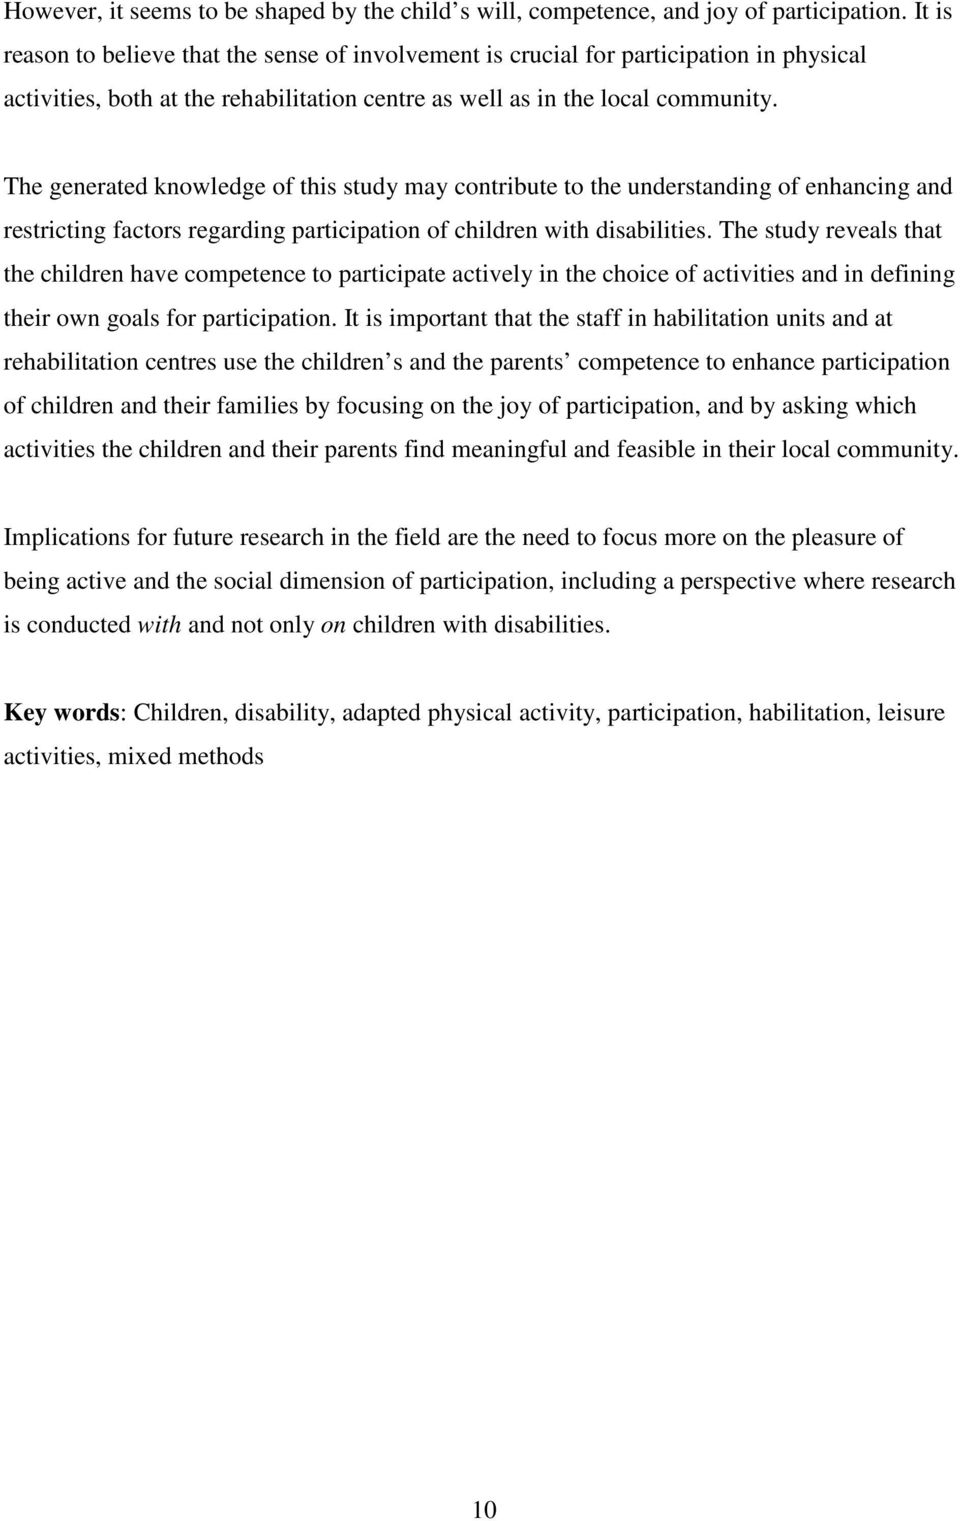 The generated knowledge of this study may contribute to the understanding of enhancing and restricting factors regarding participation of children with disabilities.